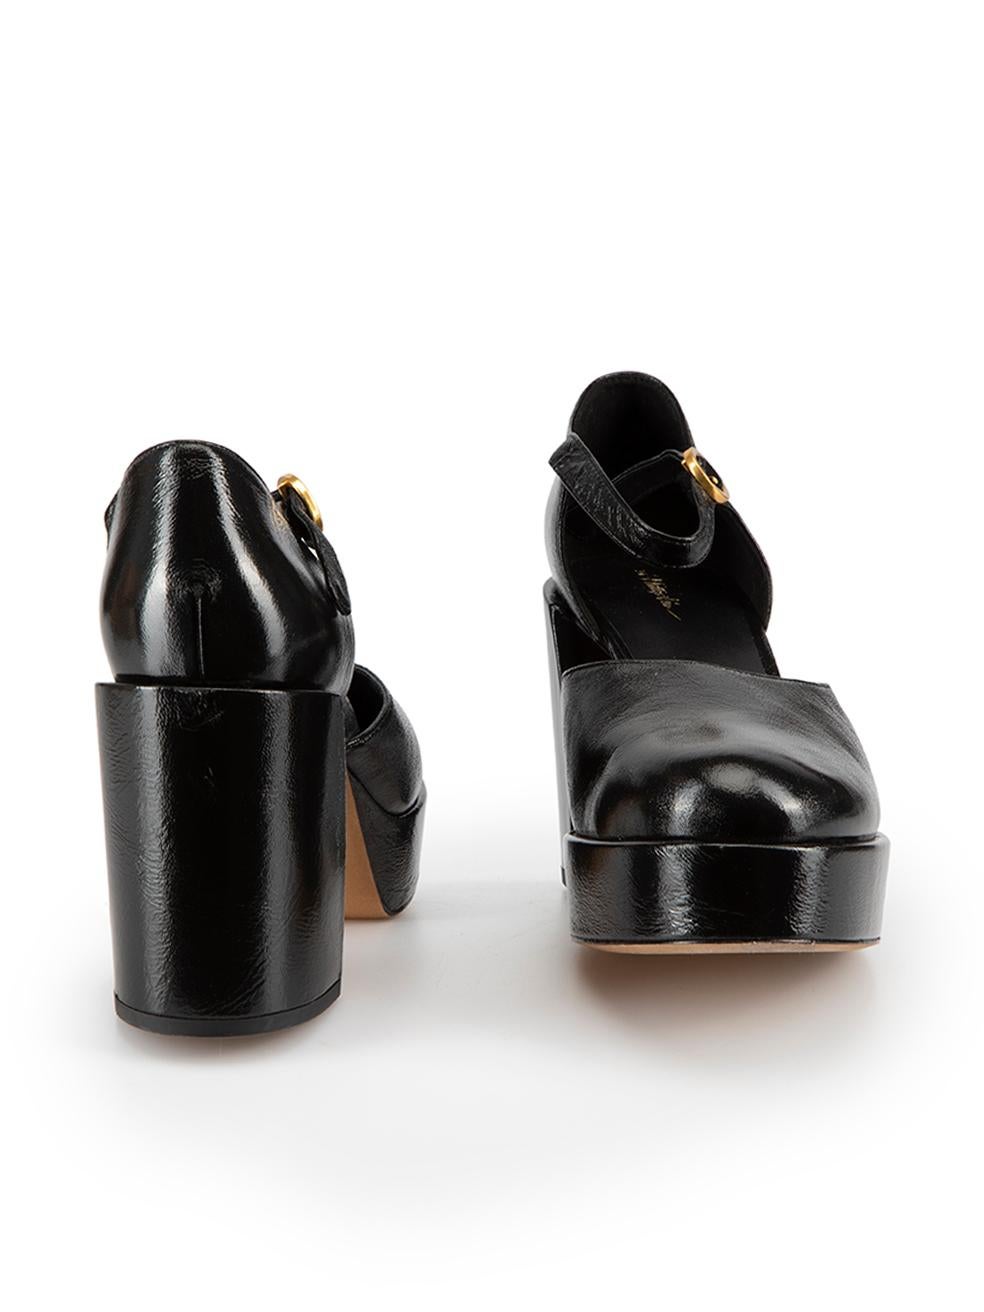 3.1 Phillip Lim Black Patent Leather Naomi Platform Heels Size IT 41 In Good Condition For Sale In London, GB